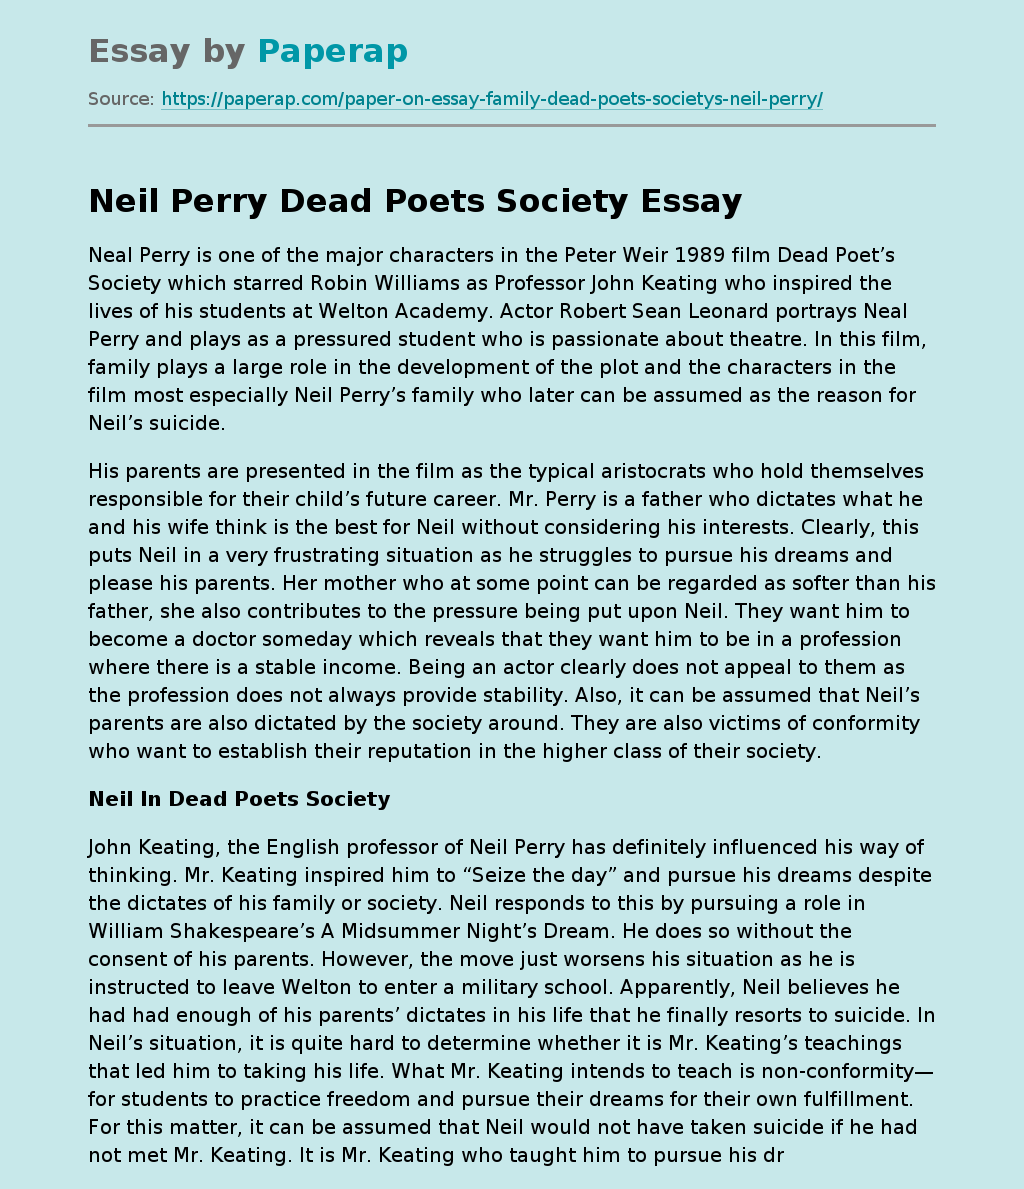 Neil Perry Dead Poets Society